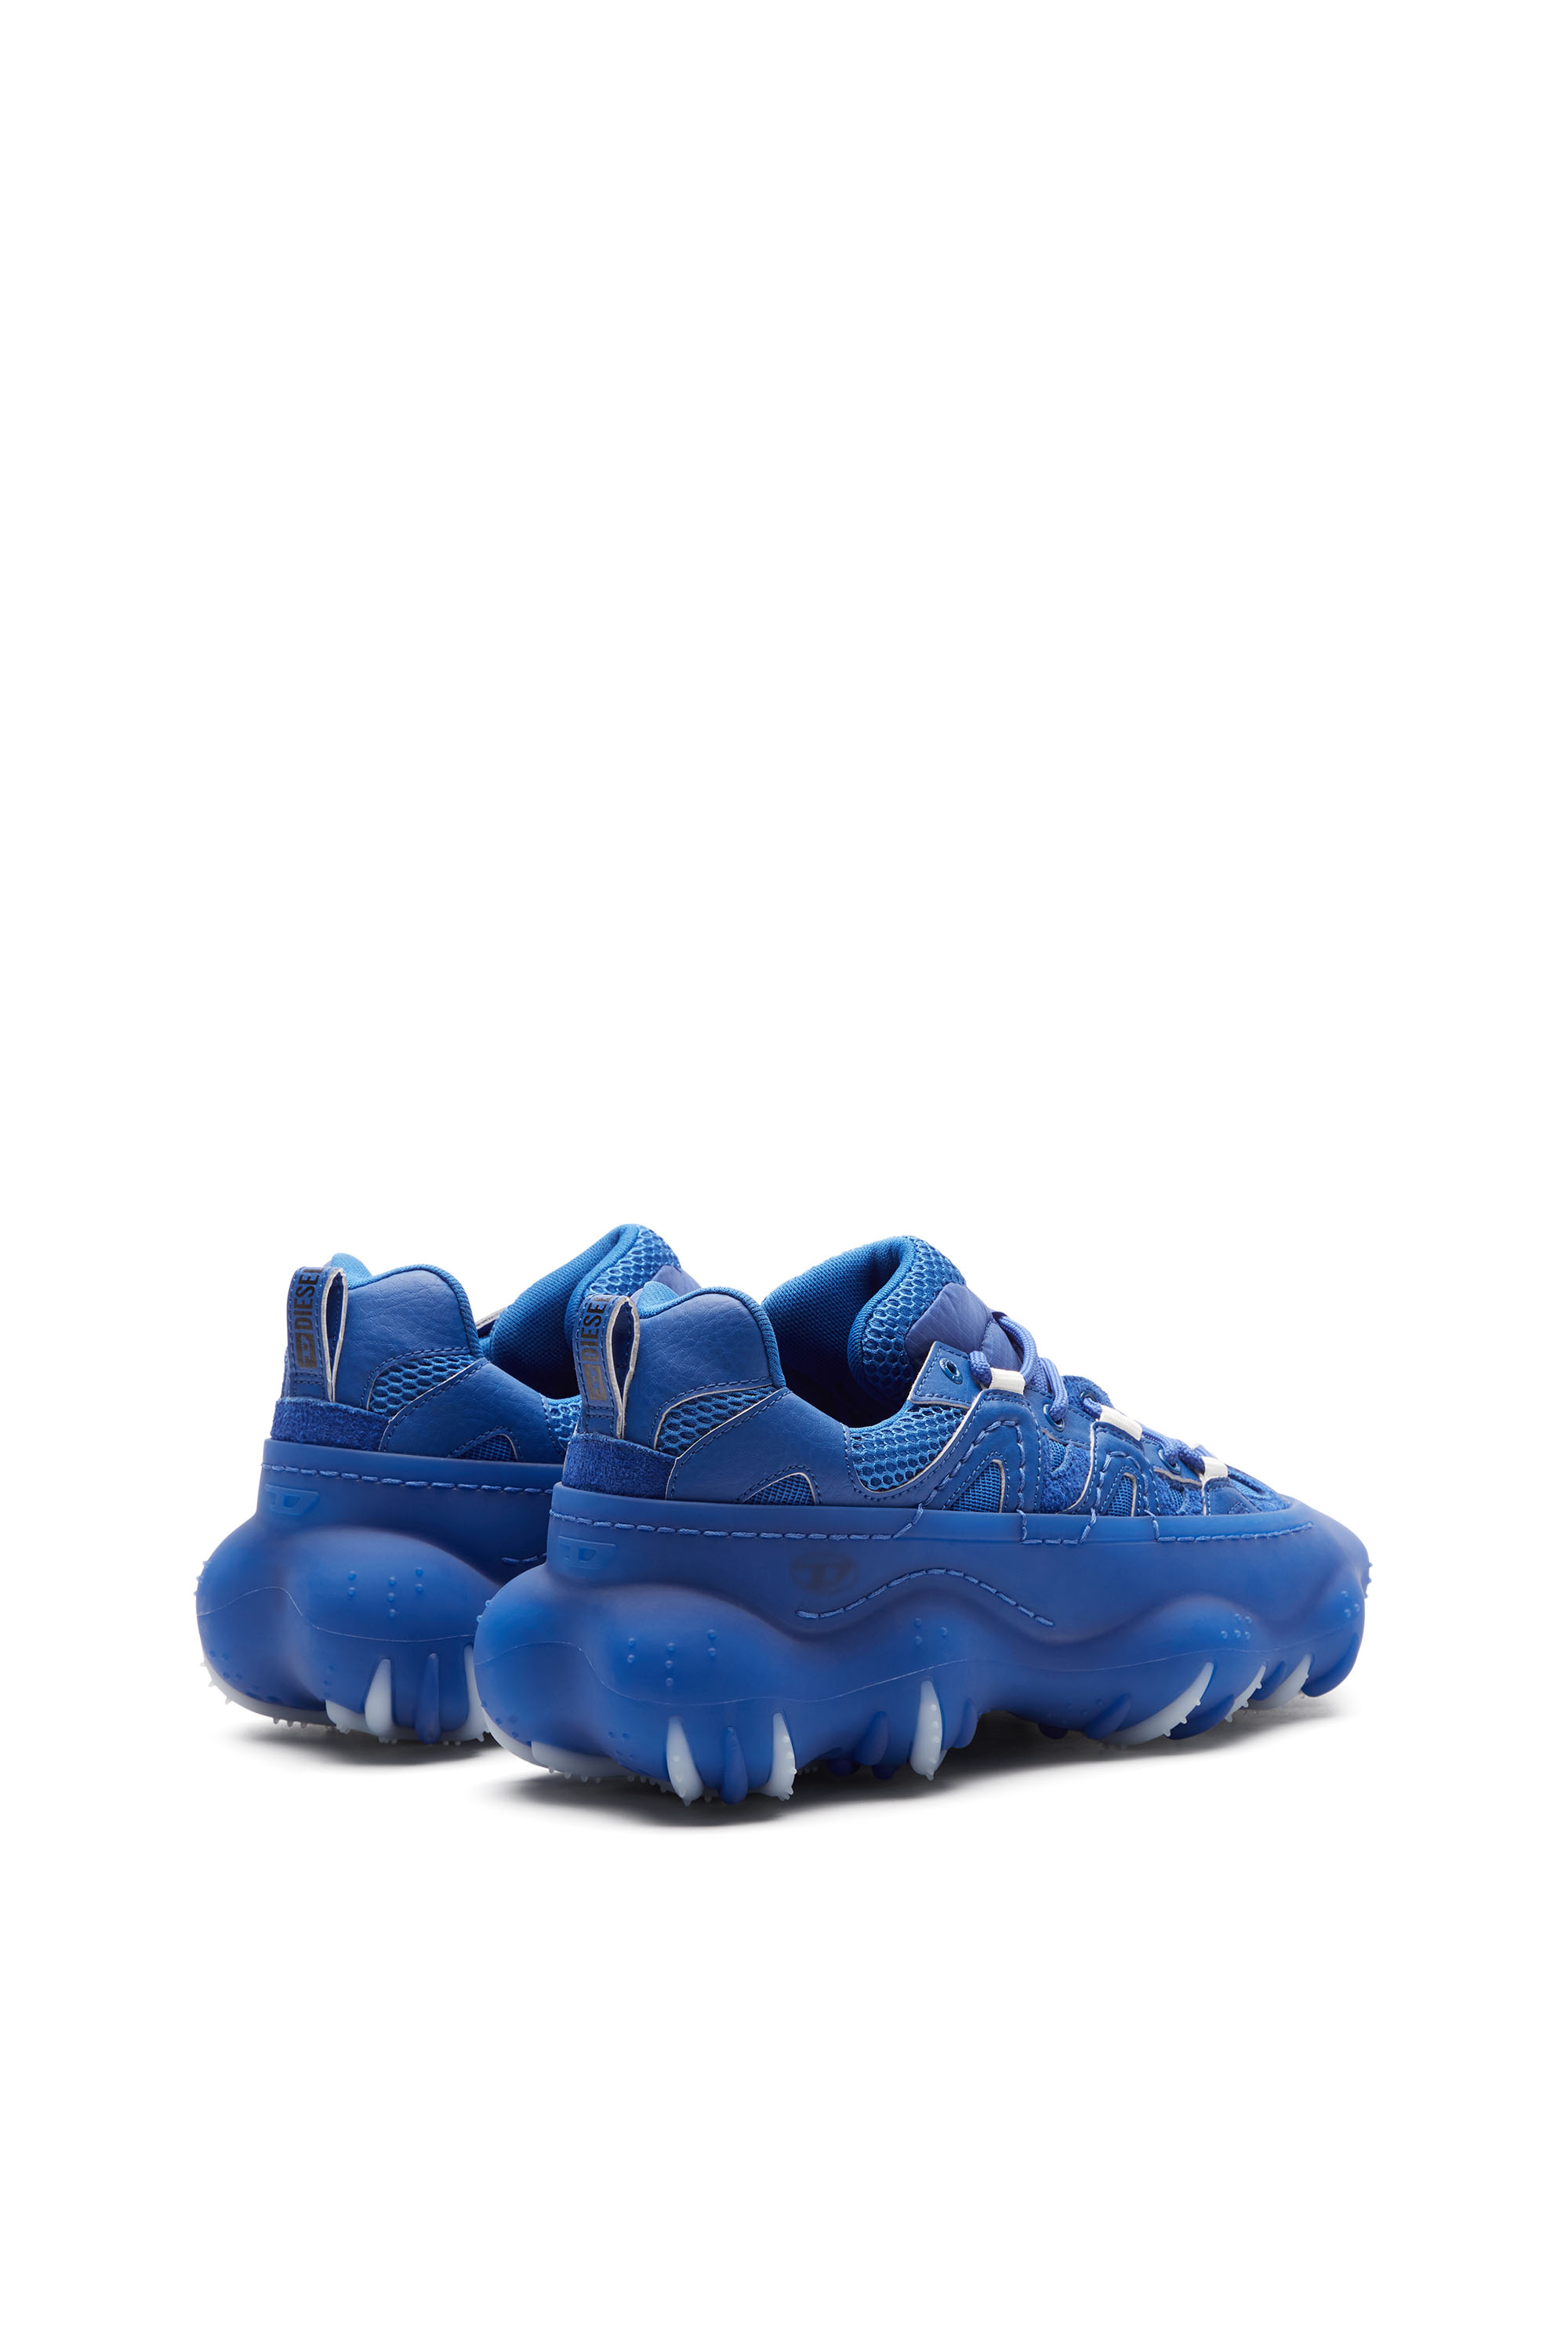 Diesel - S-PROTOTYPE P1, Man S-Prototype P1-Low-top sneakers with rubber overlay in Blue - Image 3